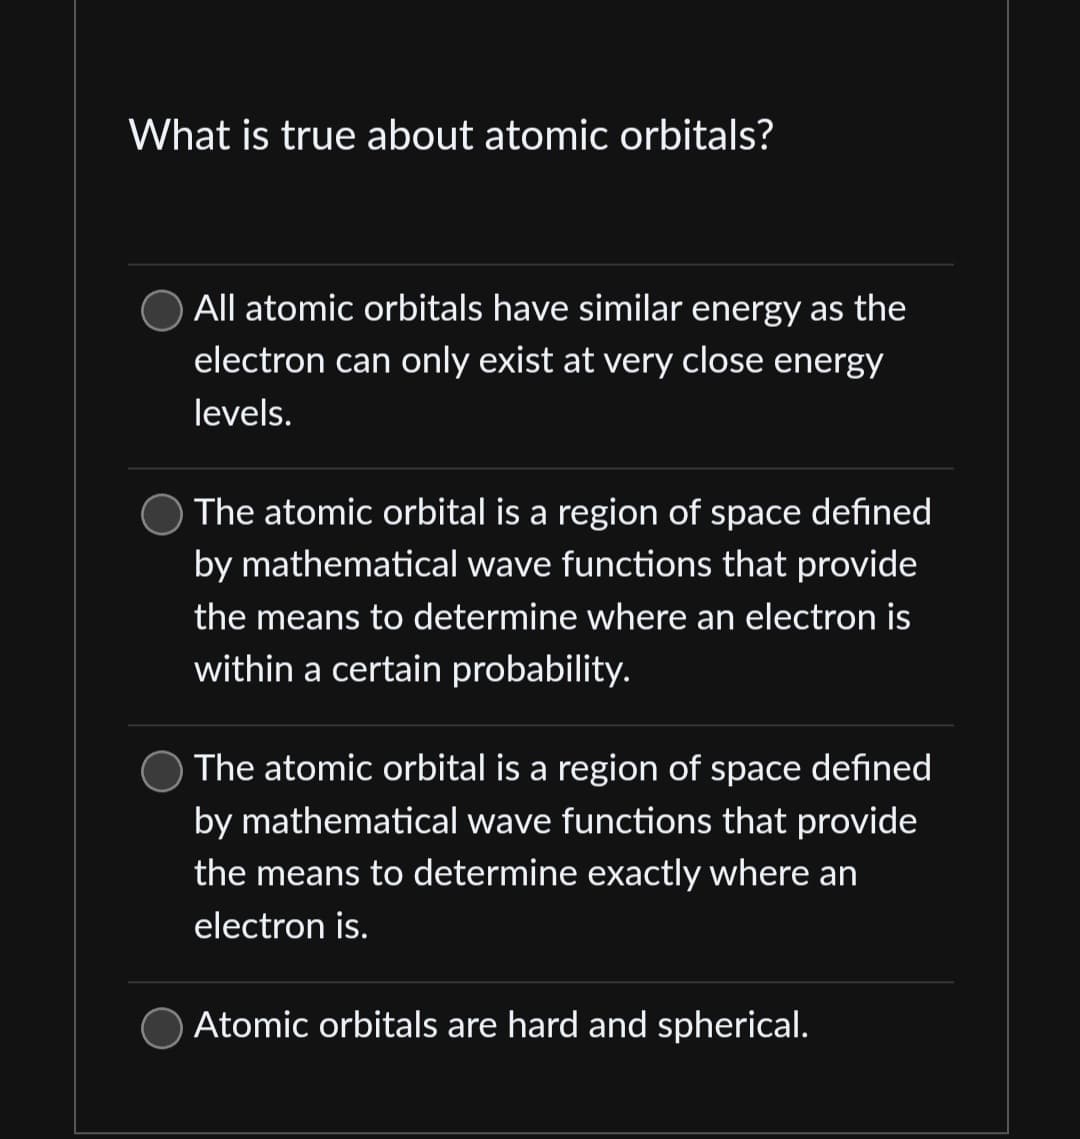 What is true about atomic orbitals?
All atomic orbitals have similar energy as the
electron can only exist at very close energy
levels.
The atomic orbital is a region of space defined
by mathematical wave functions that provide
the means to determine where an electron is
within a certain probability.
The atomic orbital is a region of space defined
by mathematical wave functions that provide
the means to determine exactly where an
electron is.
Atomic orbitals are hard and spherical.